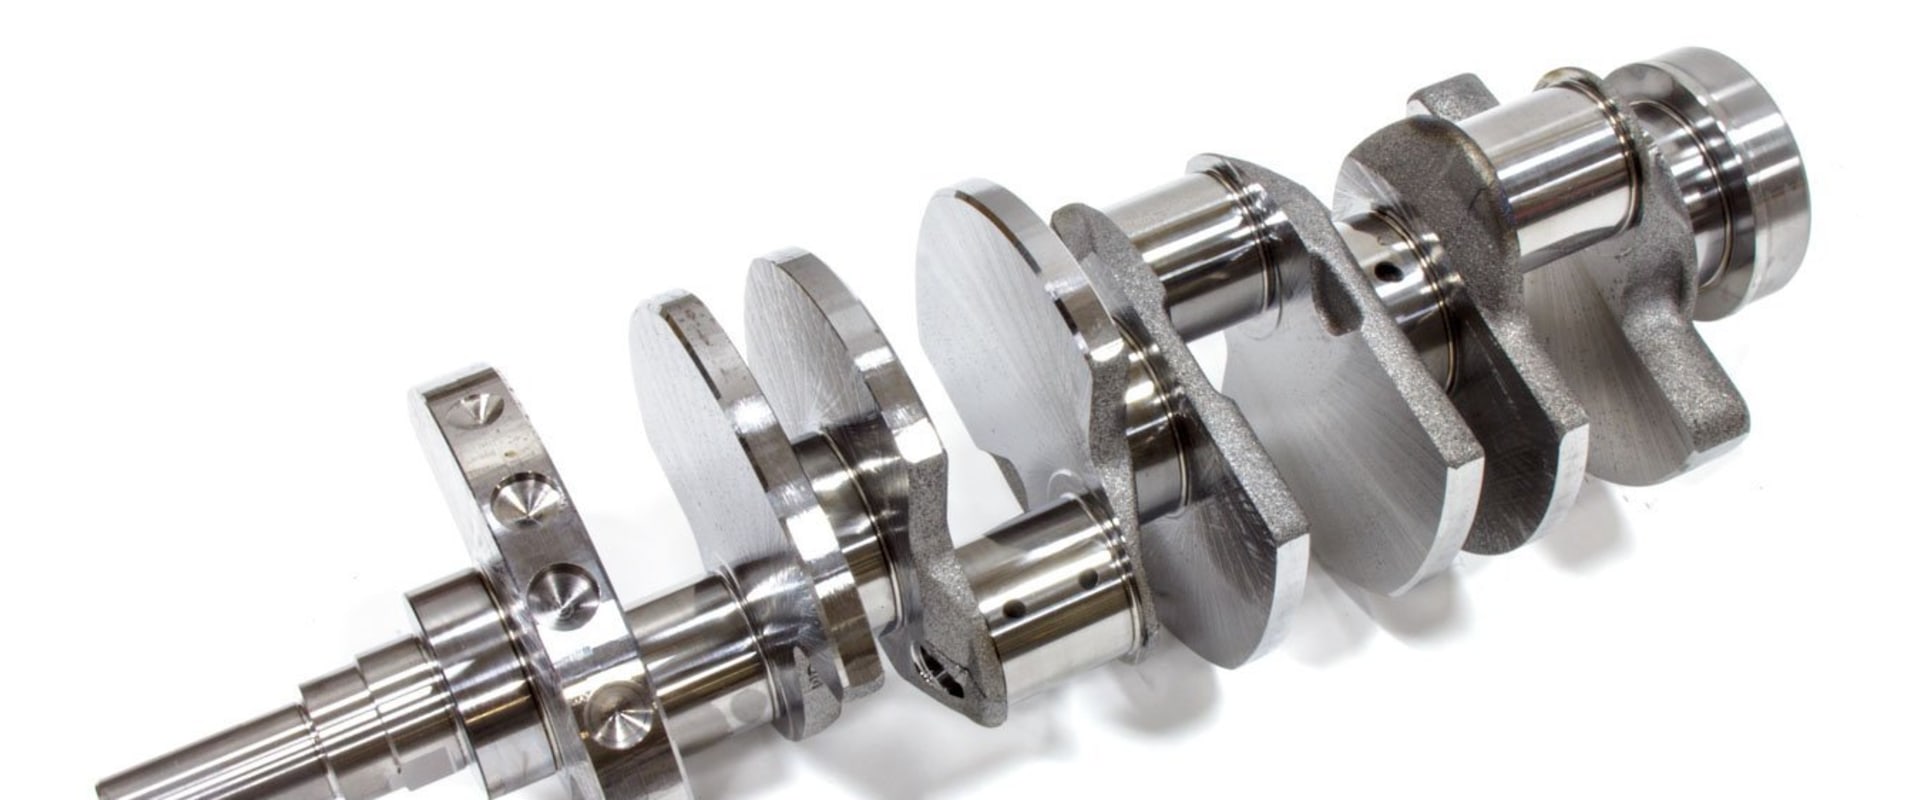 Crankshafts for Sale: What You Need to Know